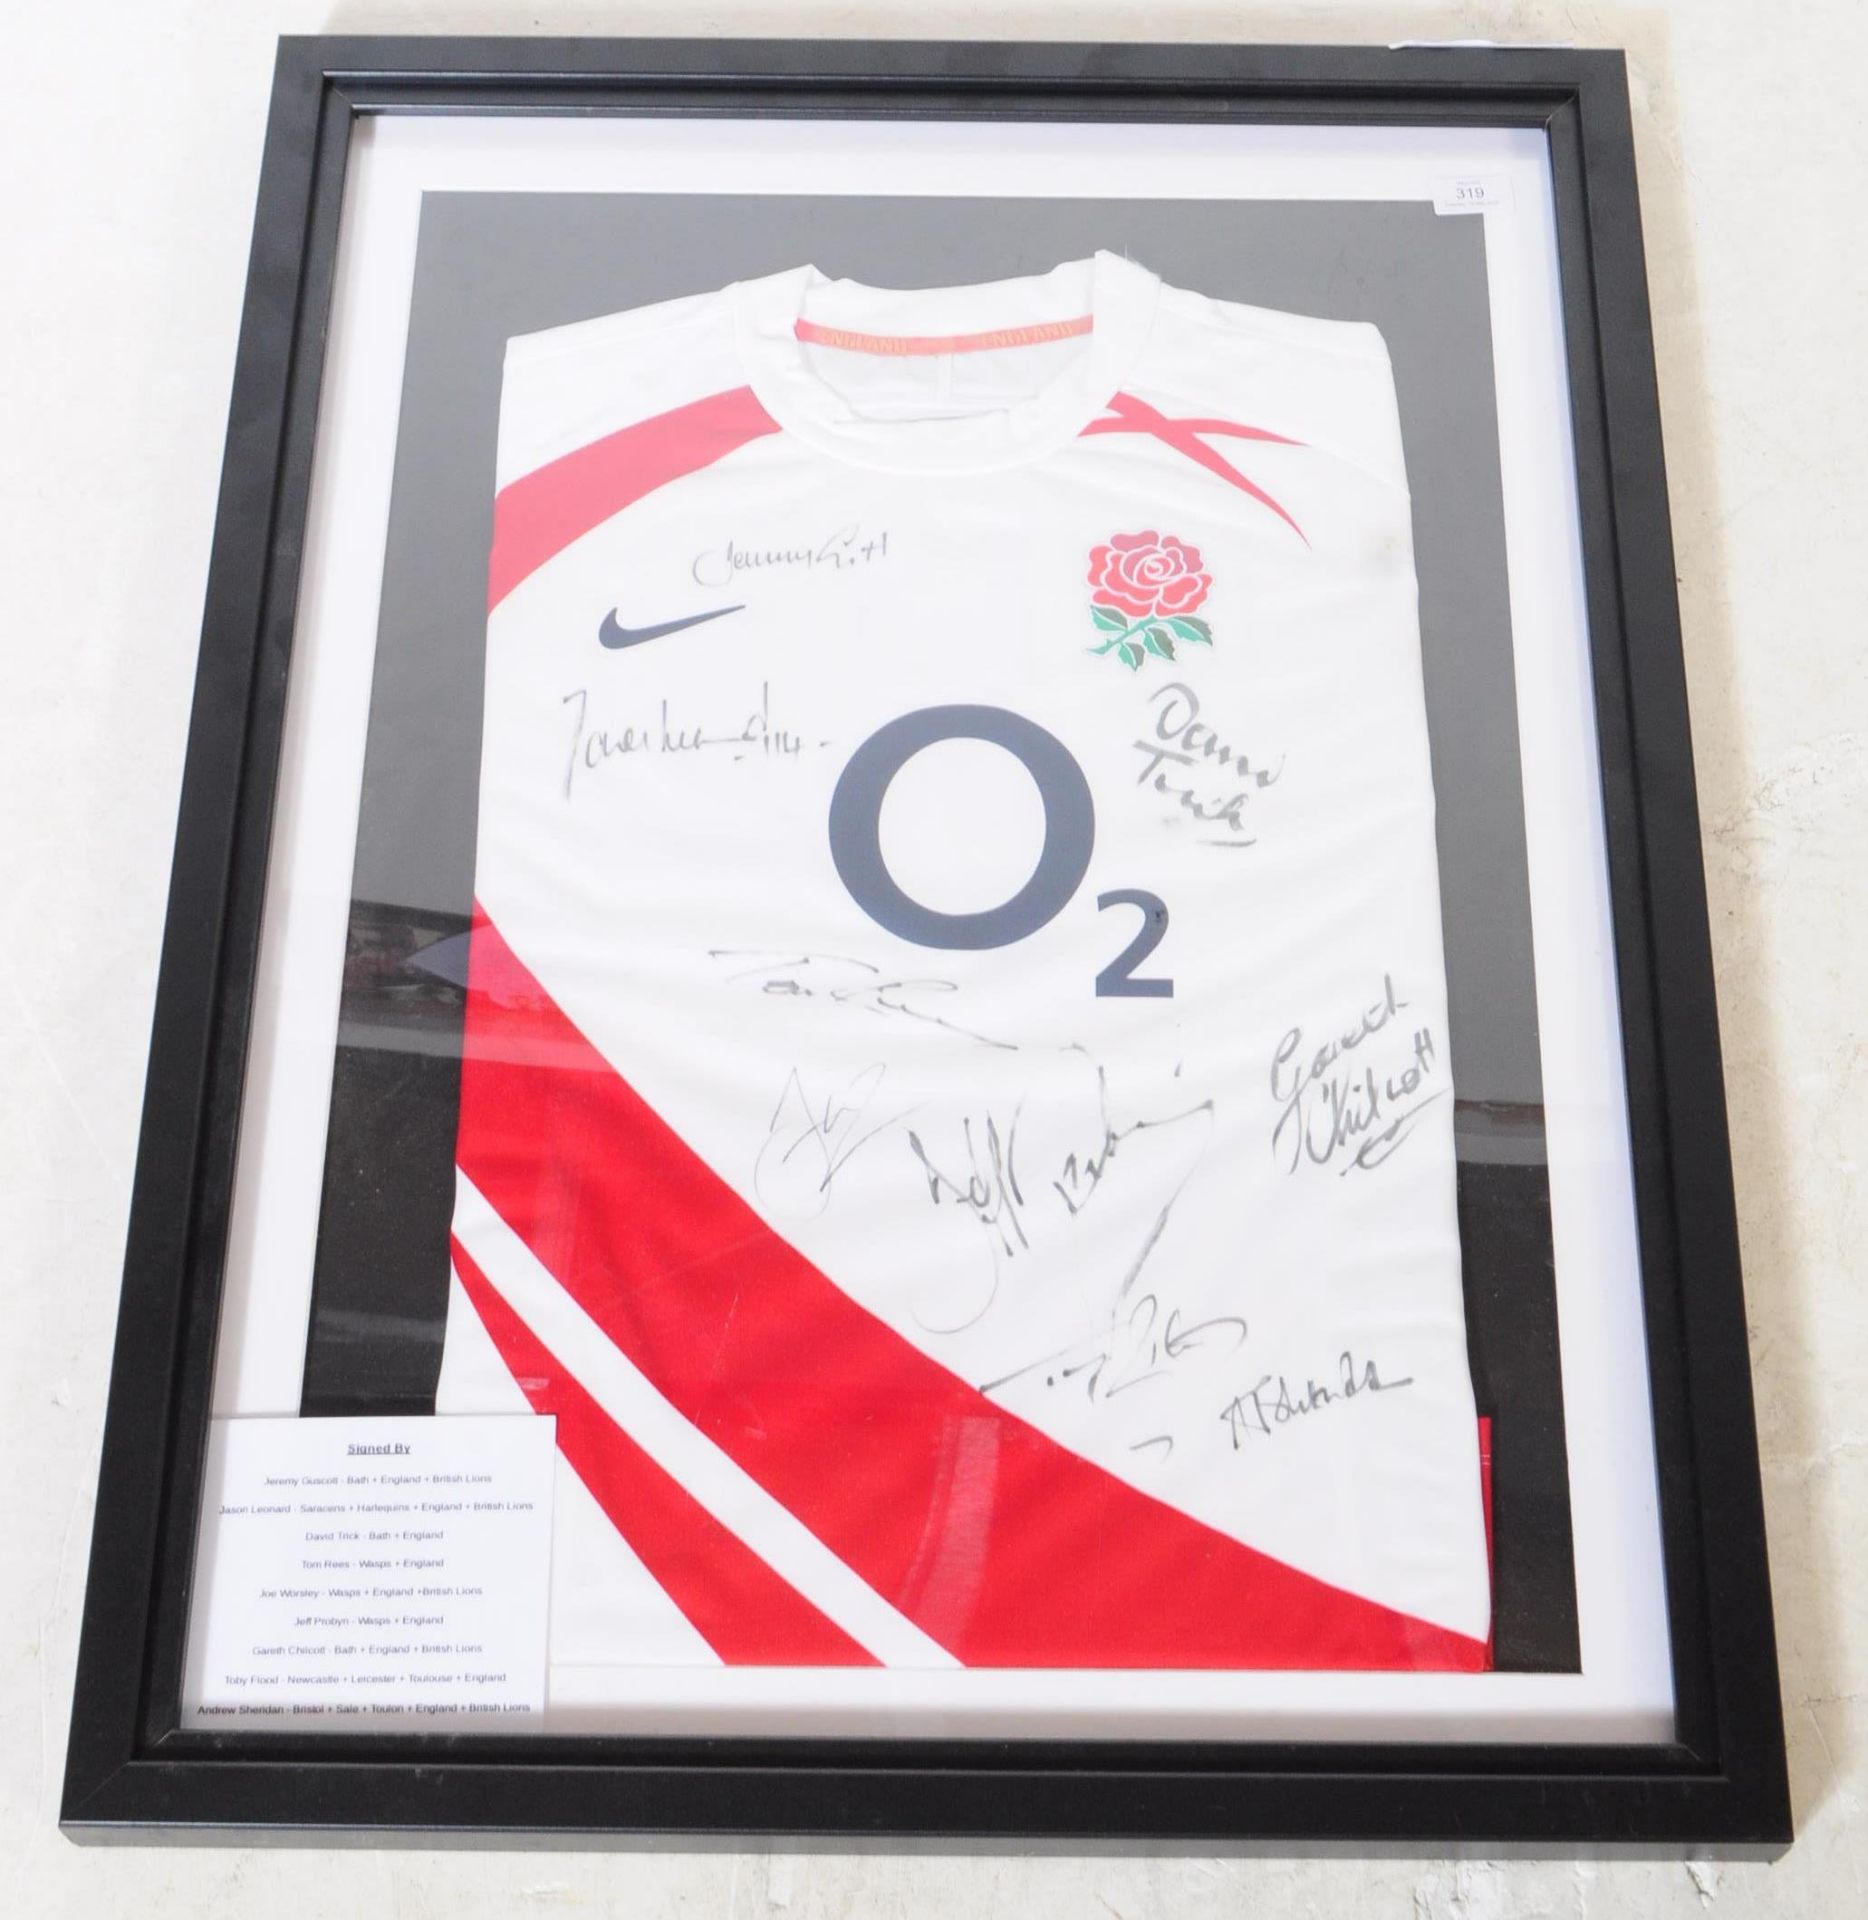 SPORTING INTEREST - SIGNED ENGLAND RUGBY SHIRT IN FRAME